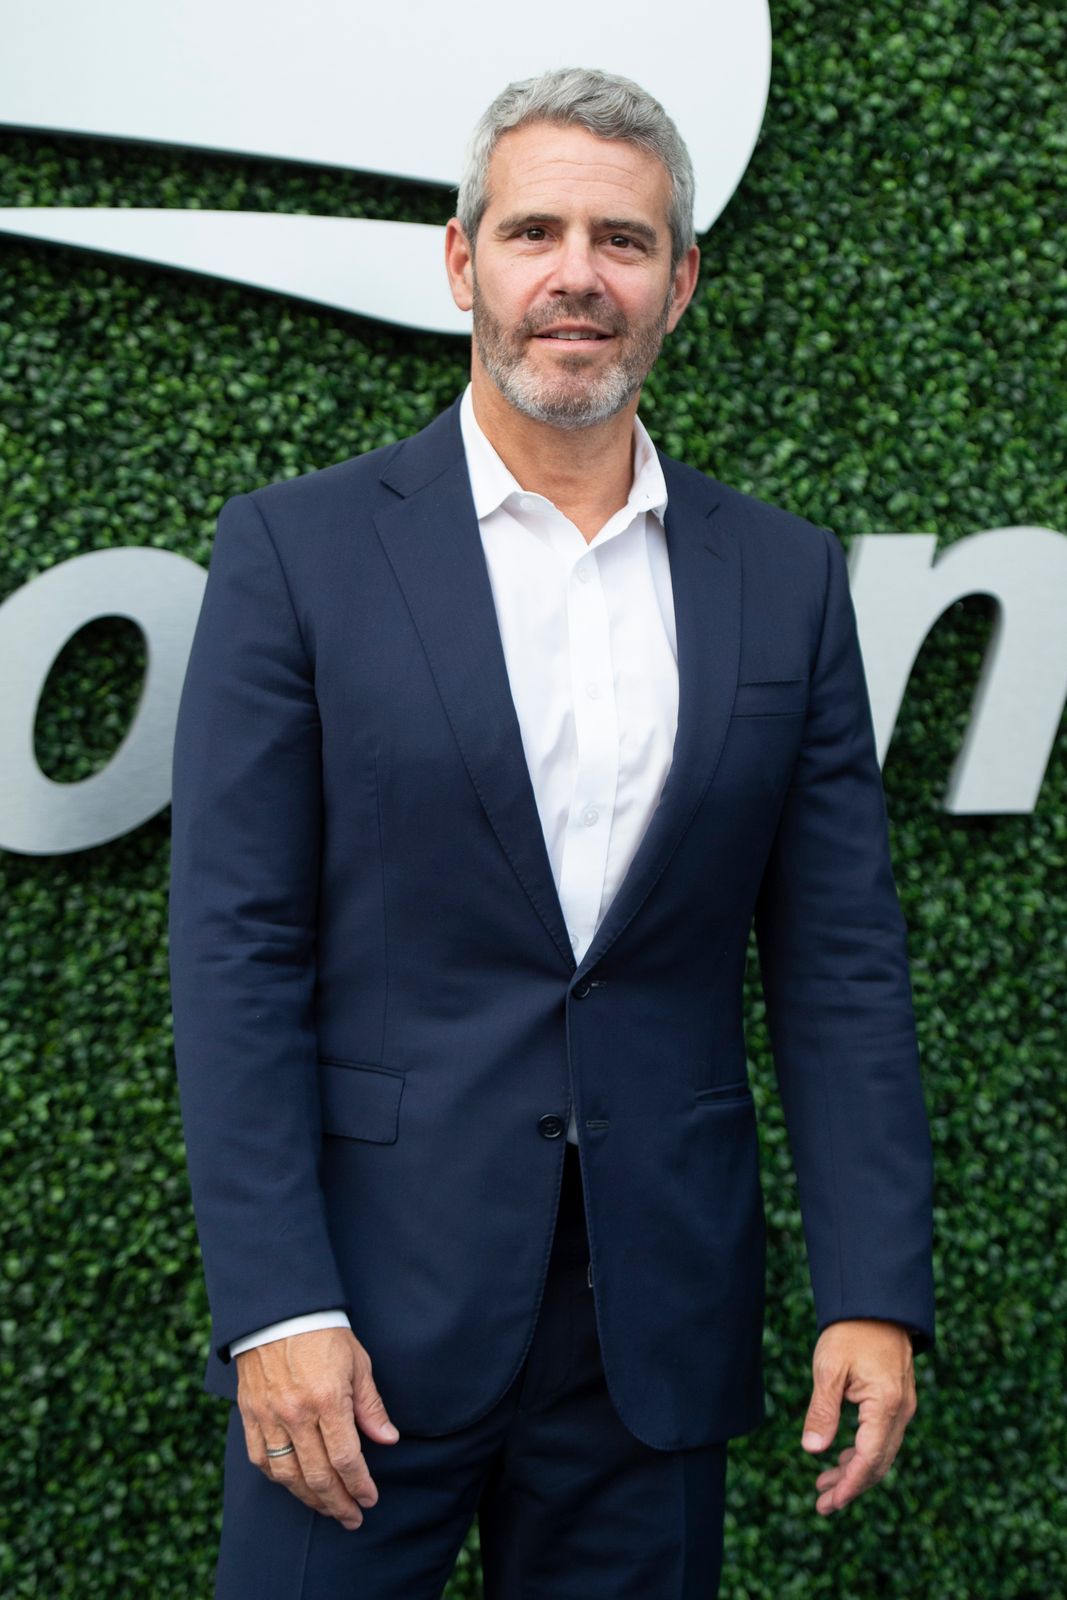 Andy Cohen at the US Open on September 5, 2019, in New York City | Photo: Adrian Edwards/GC Images/Getty Images